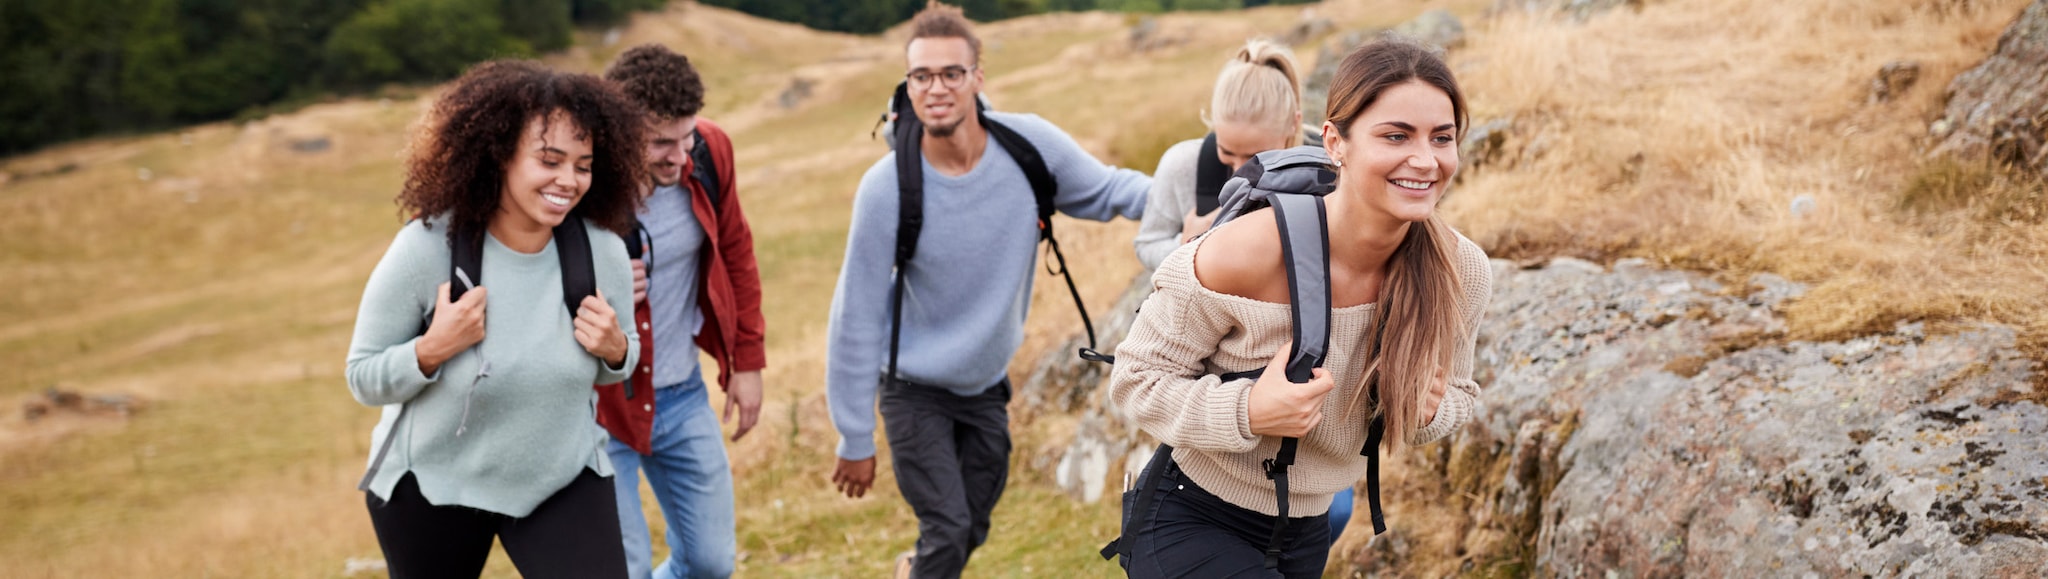 Diverse group of young adults hiking